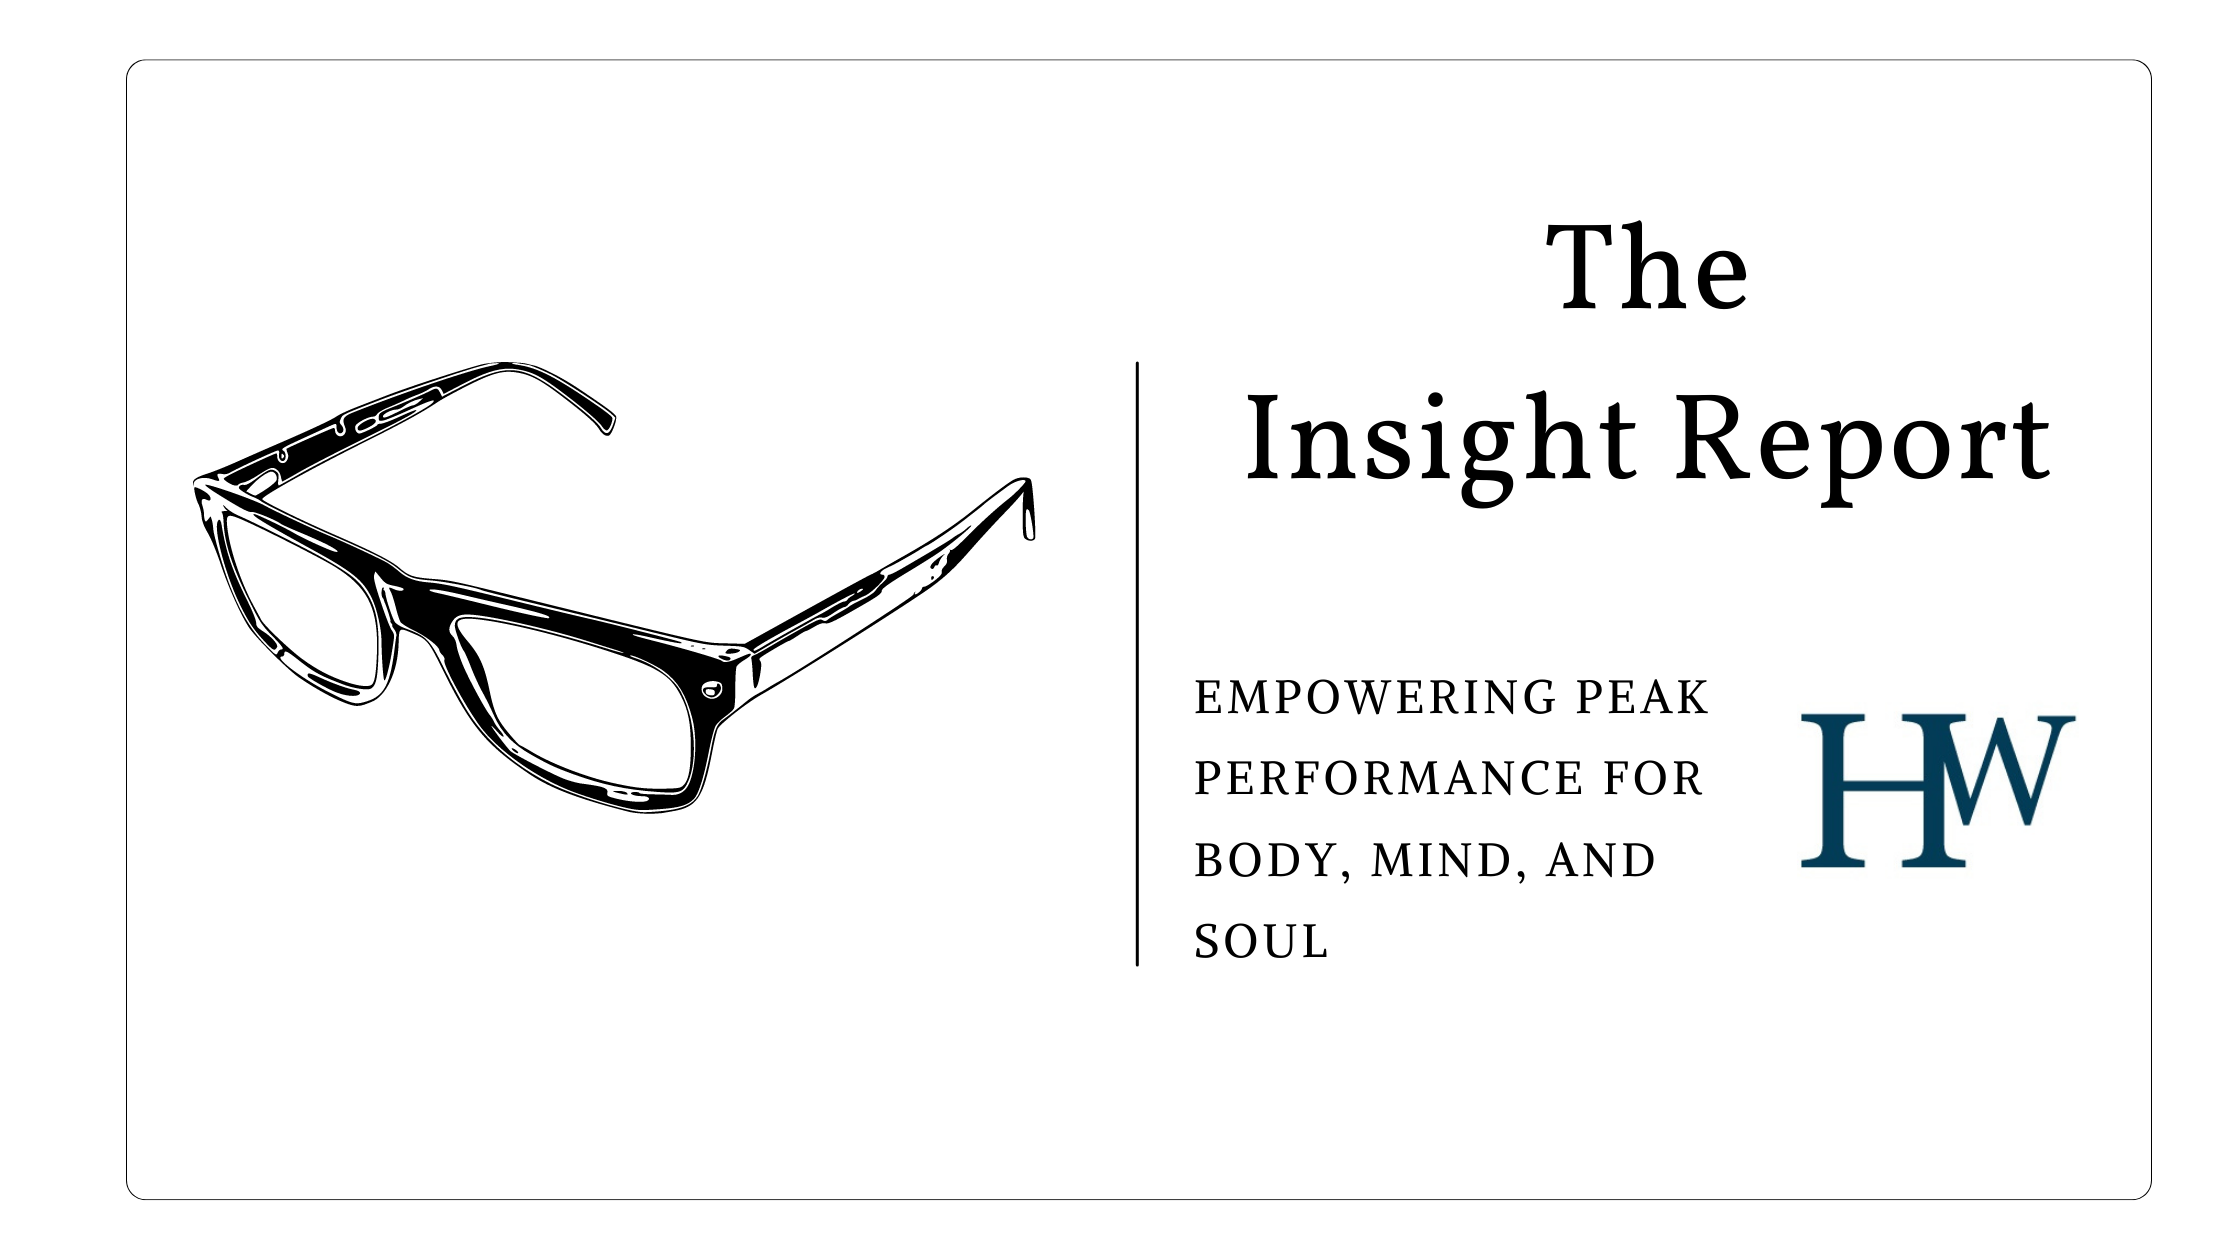 The Insight Report